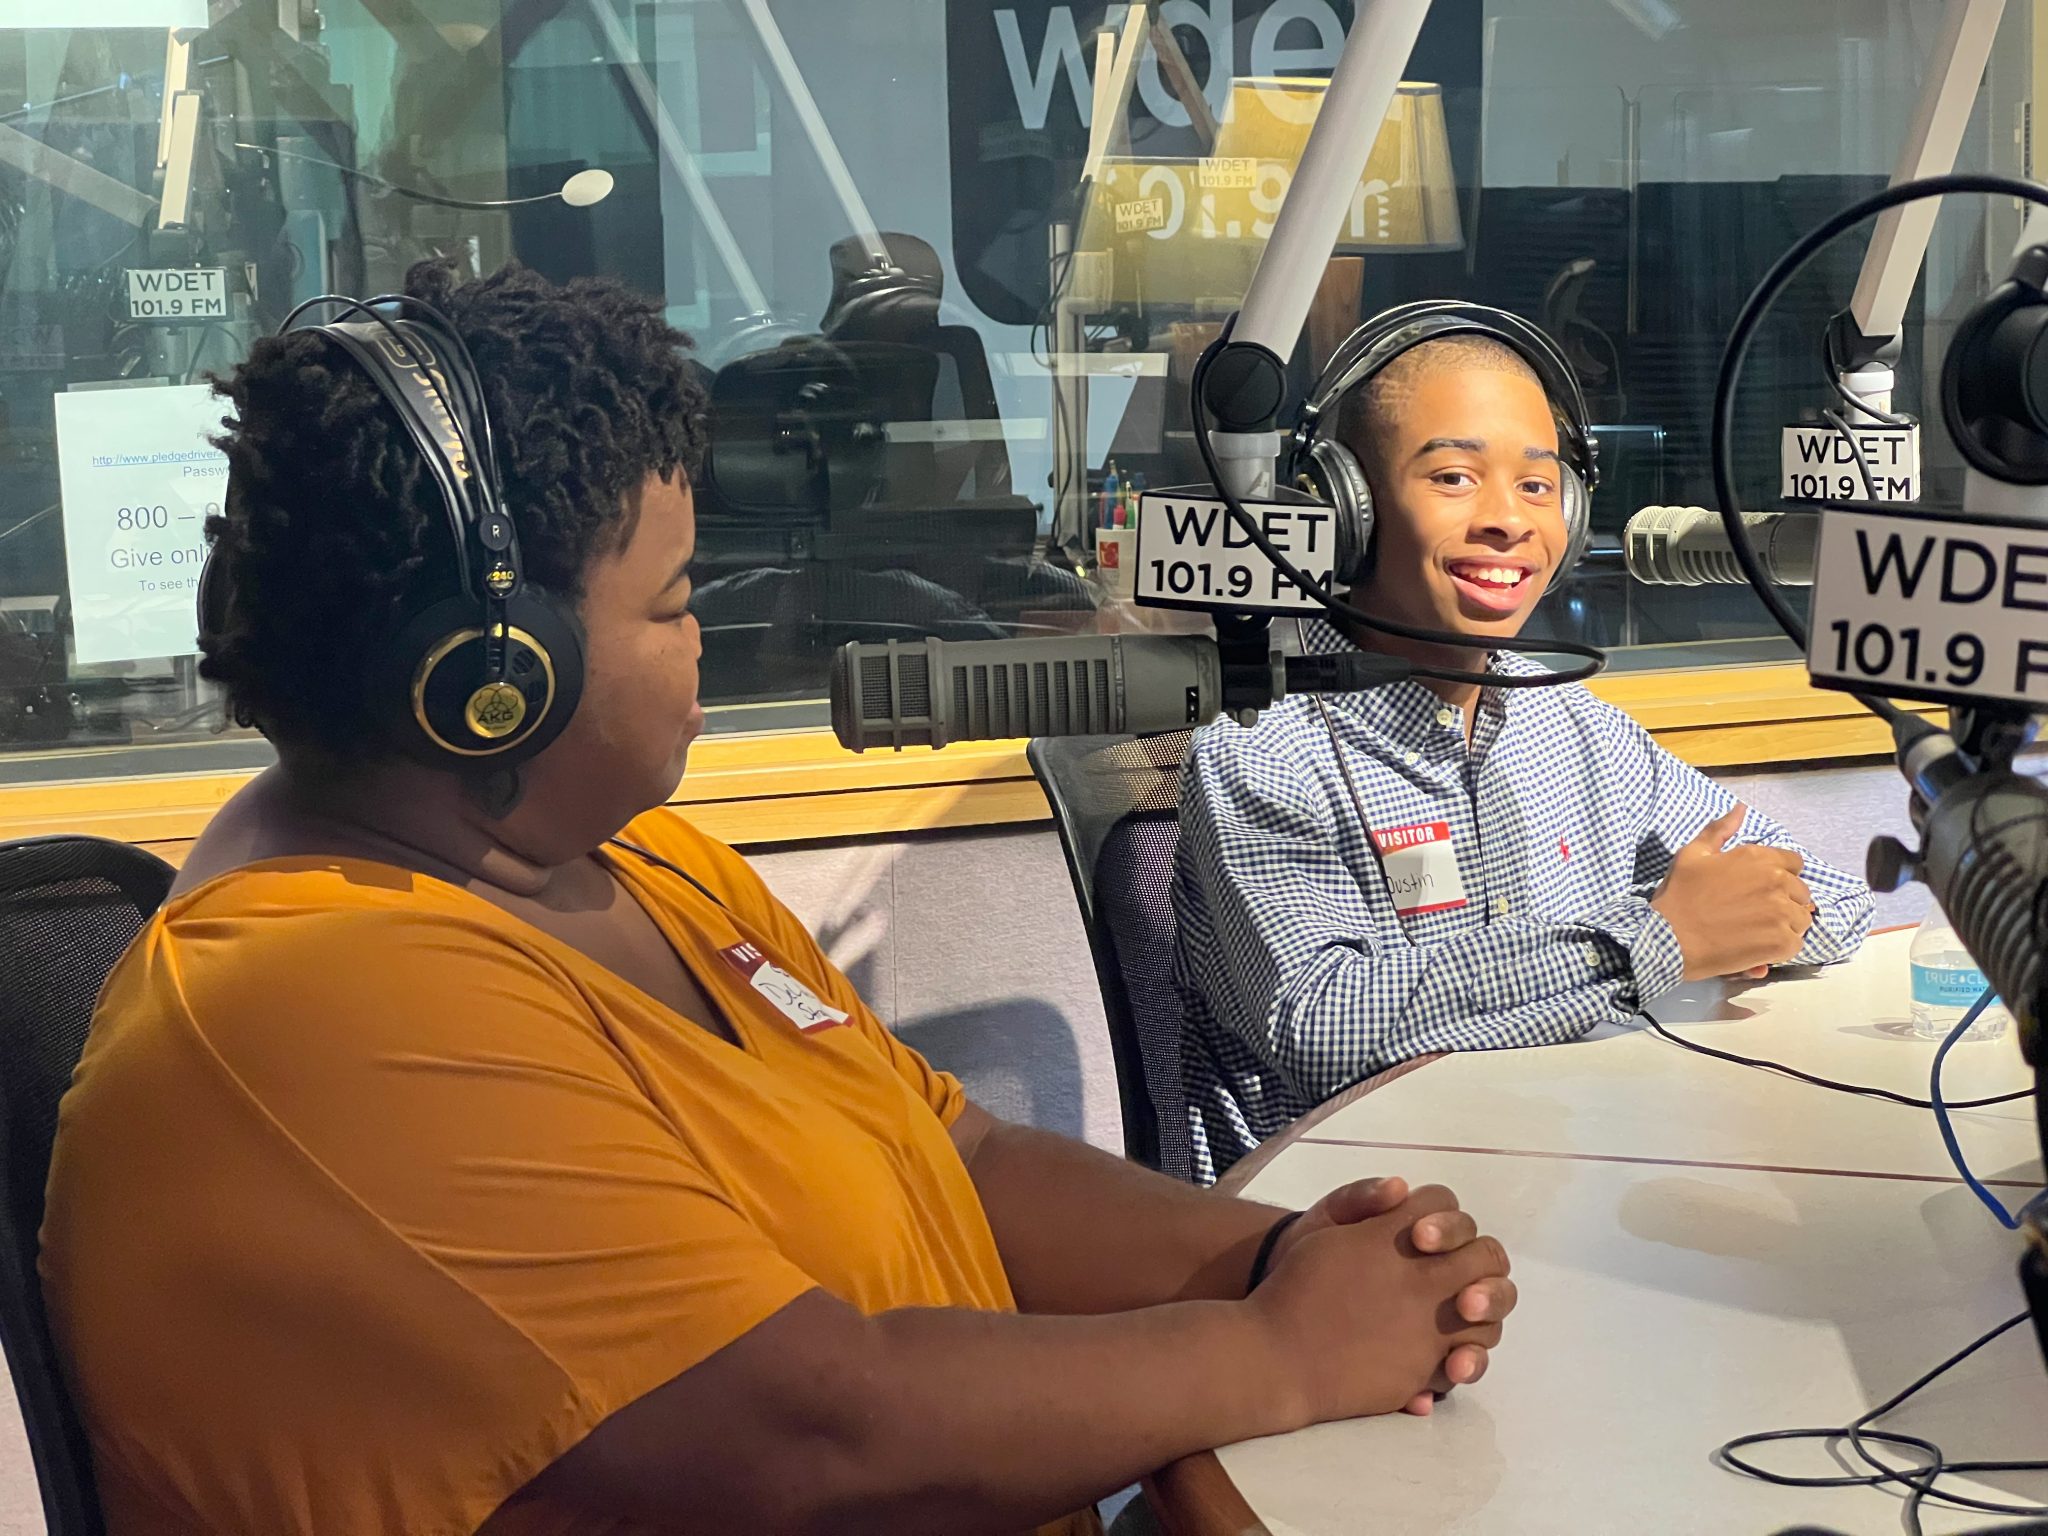 Mosaic Youth Theatre DeLashea Strawder (left) and Justin Washington (right) in the WDET studios.